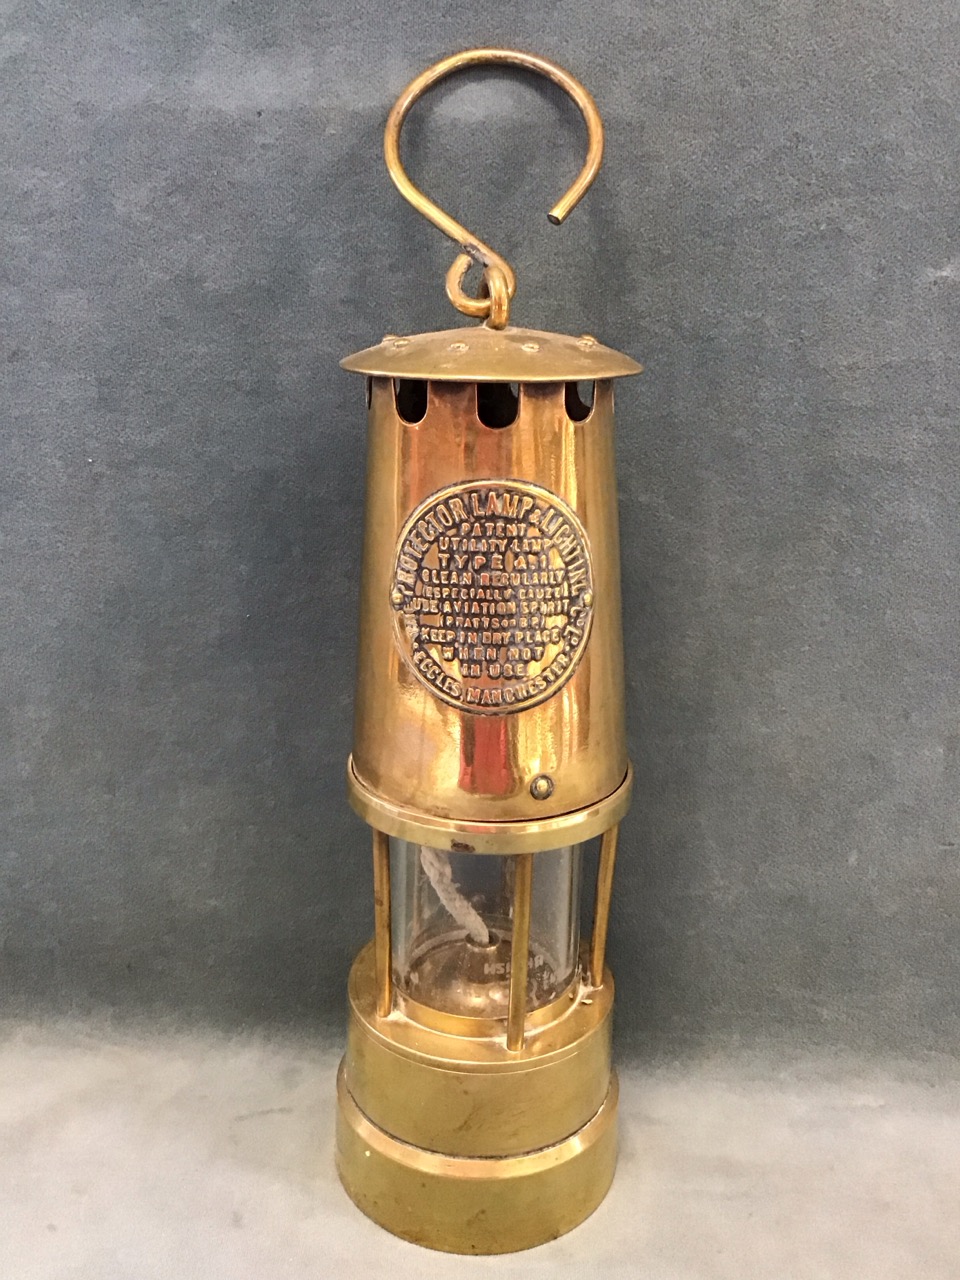 A brass miners lamp by the Protector Lamp & Lighting Co - Eccles, serial no. 54546, with hook to